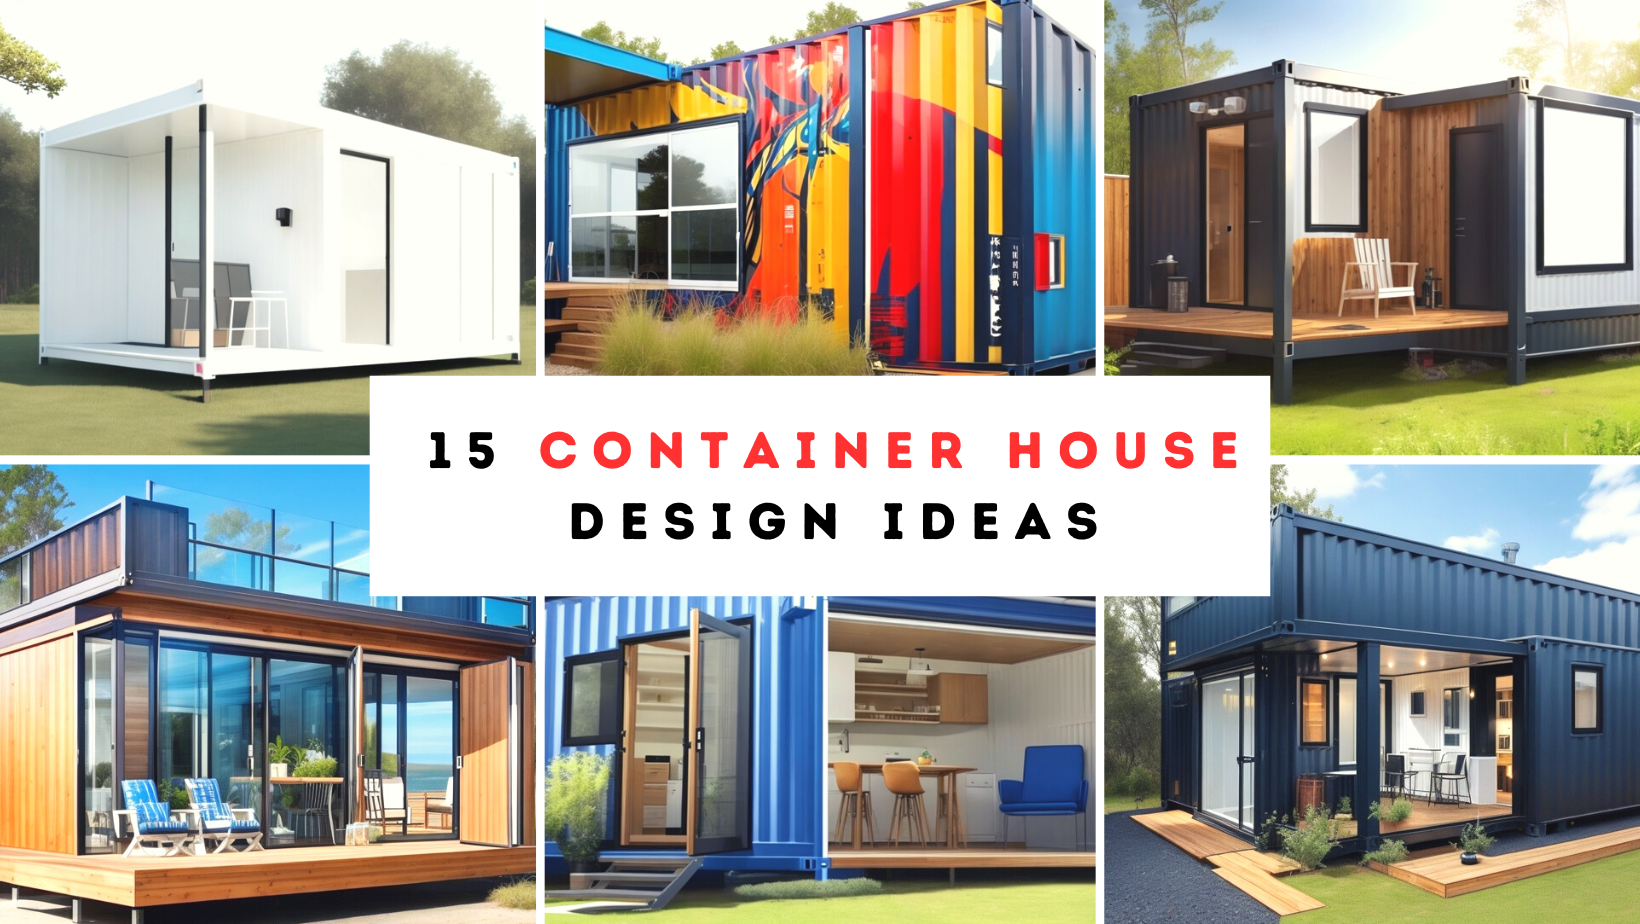 15 Container House Design Ideas for Sustainable and Stylish Living